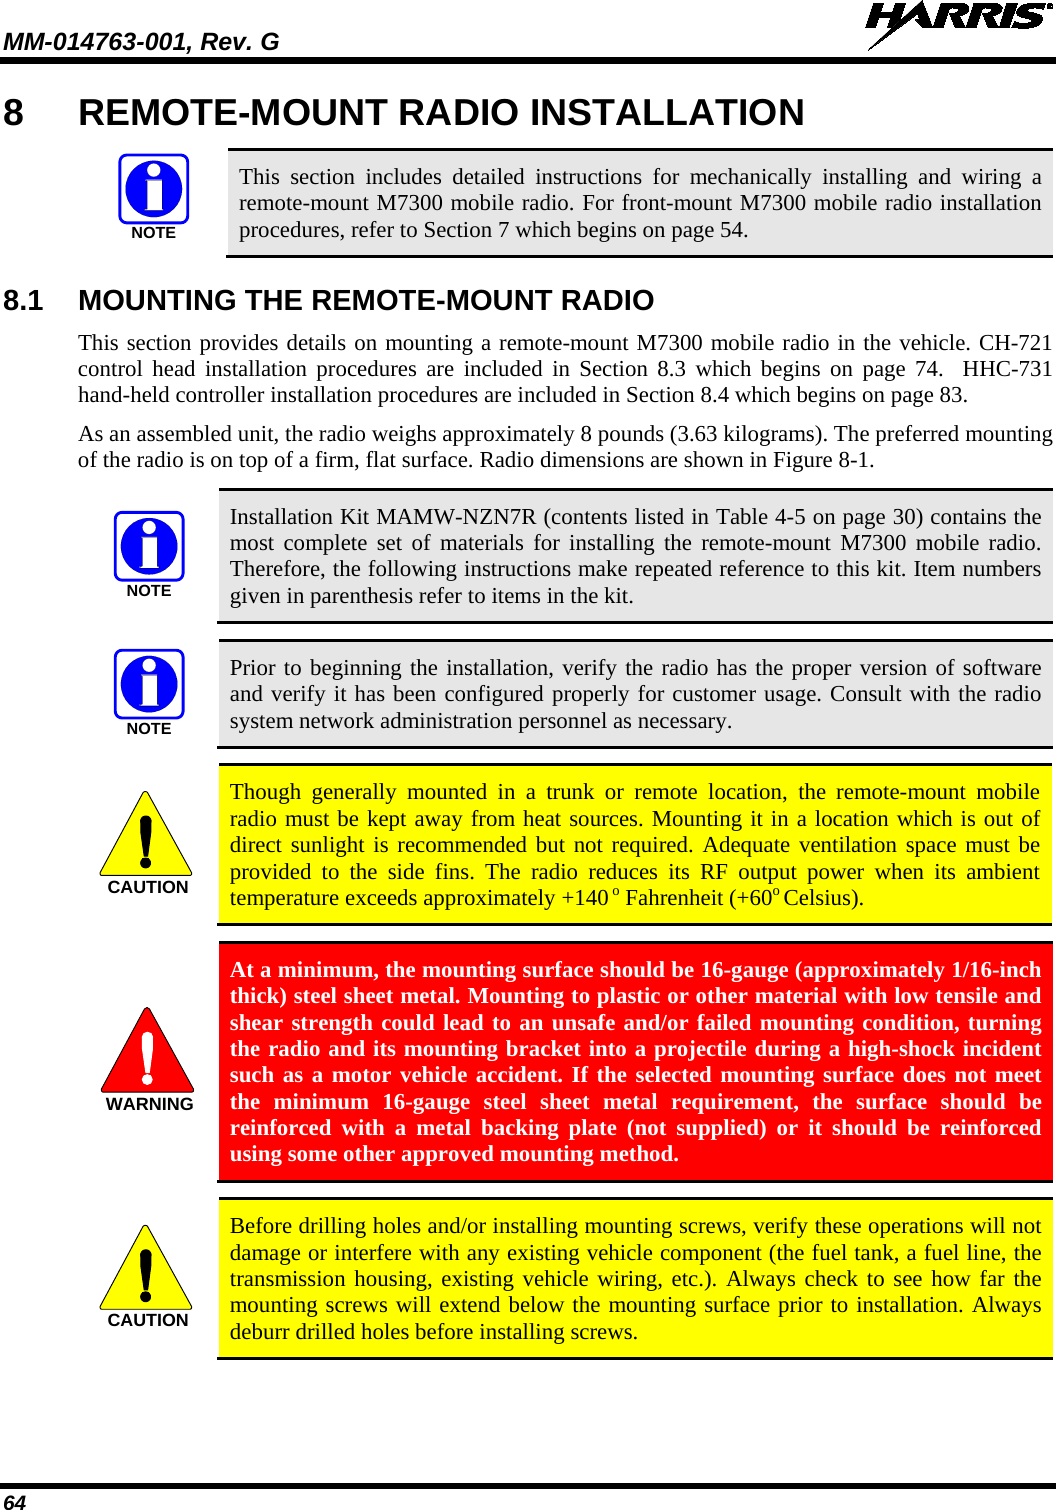 MM-014763-001, Rev. G   64 8  REMOTE-MOUNT RADIO INSTALLATION   This section includes detailed instructions for mechanically installing and wiring a remote-mount M7300 mobile radio. For front-mount M7300 mobile radio installation procedures, refer to Section 7 which begins on page 54. 8.1 MOUNTING THE REMOTE-MOUNT RADIO This section provides details on mounting a remote-mount M7300 mobile radio in the vehicle. CH-721 control head installation procedures are included in Section 8.3 which begins on page 74.  HHC-731 hand-held controller installation procedures are included in Section 8.4 which begins on page 83. As an assembled unit, the radio weighs approximately 8 pounds (3.63 kilograms). The preferred mounting of the radio is on top of a firm, flat surface. Radio dimensions are shown in Figure 8-1.   Installation Kit MAMW-NZN7R (contents listed in Table 4-5 on page 30) contains the most complete set of materials for installing the remote-mount M7300 mobile  radio. Therefore, the following instructions make repeated reference to this kit. Item numbers given in parenthesis refer to items in the kit.   Prior to beginning the installation, verify the radio has the proper version of software and verify it has been configured properly for customer usage. Consult with the radio system network administration personnel as necessary.   Though generally mounted in a trunk or remote location, the remote-mount  mobile radio must be kept away from heat sources. Mounting it in a location which is out of direct sunlight is recommended but not required. Adequate ventilation space must be provided to the side fins. The radio reduces its RF output power when its ambient temperature exceeds approximately +140 o Fahrenheit (+60o Celsius).   At a minimum, the mounting surface should be 16-gauge (approximately 1/16-inch thick) steel sheet metal. Mounting to plastic or other material with low tensile and shear strength could lead to an unsafe and/or failed mounting condition, turning the radio and its mounting bracket into a projectile during a high-shock incident such as a motor vehicle accident. If the selected mounting surface does not meet the minimum 16-gauge steel sheet metal requirement, the surface should be reinforced with a metal backing plate (not supplied) or it should be reinforced using some other approved mounting method.   Before drilling holes and/or installing mounting screws, verify these operations will not damage or interfere with any existing vehicle component (the fuel tank, a fuel line, the transmission housing, existing vehicle wiring, etc.). Always check to see how far the mounting screws will extend below the mounting surface prior to installation. Always deburr drilled holes before installing screws. NOTENOTENOTECAUTIONWARNINGCAUTION